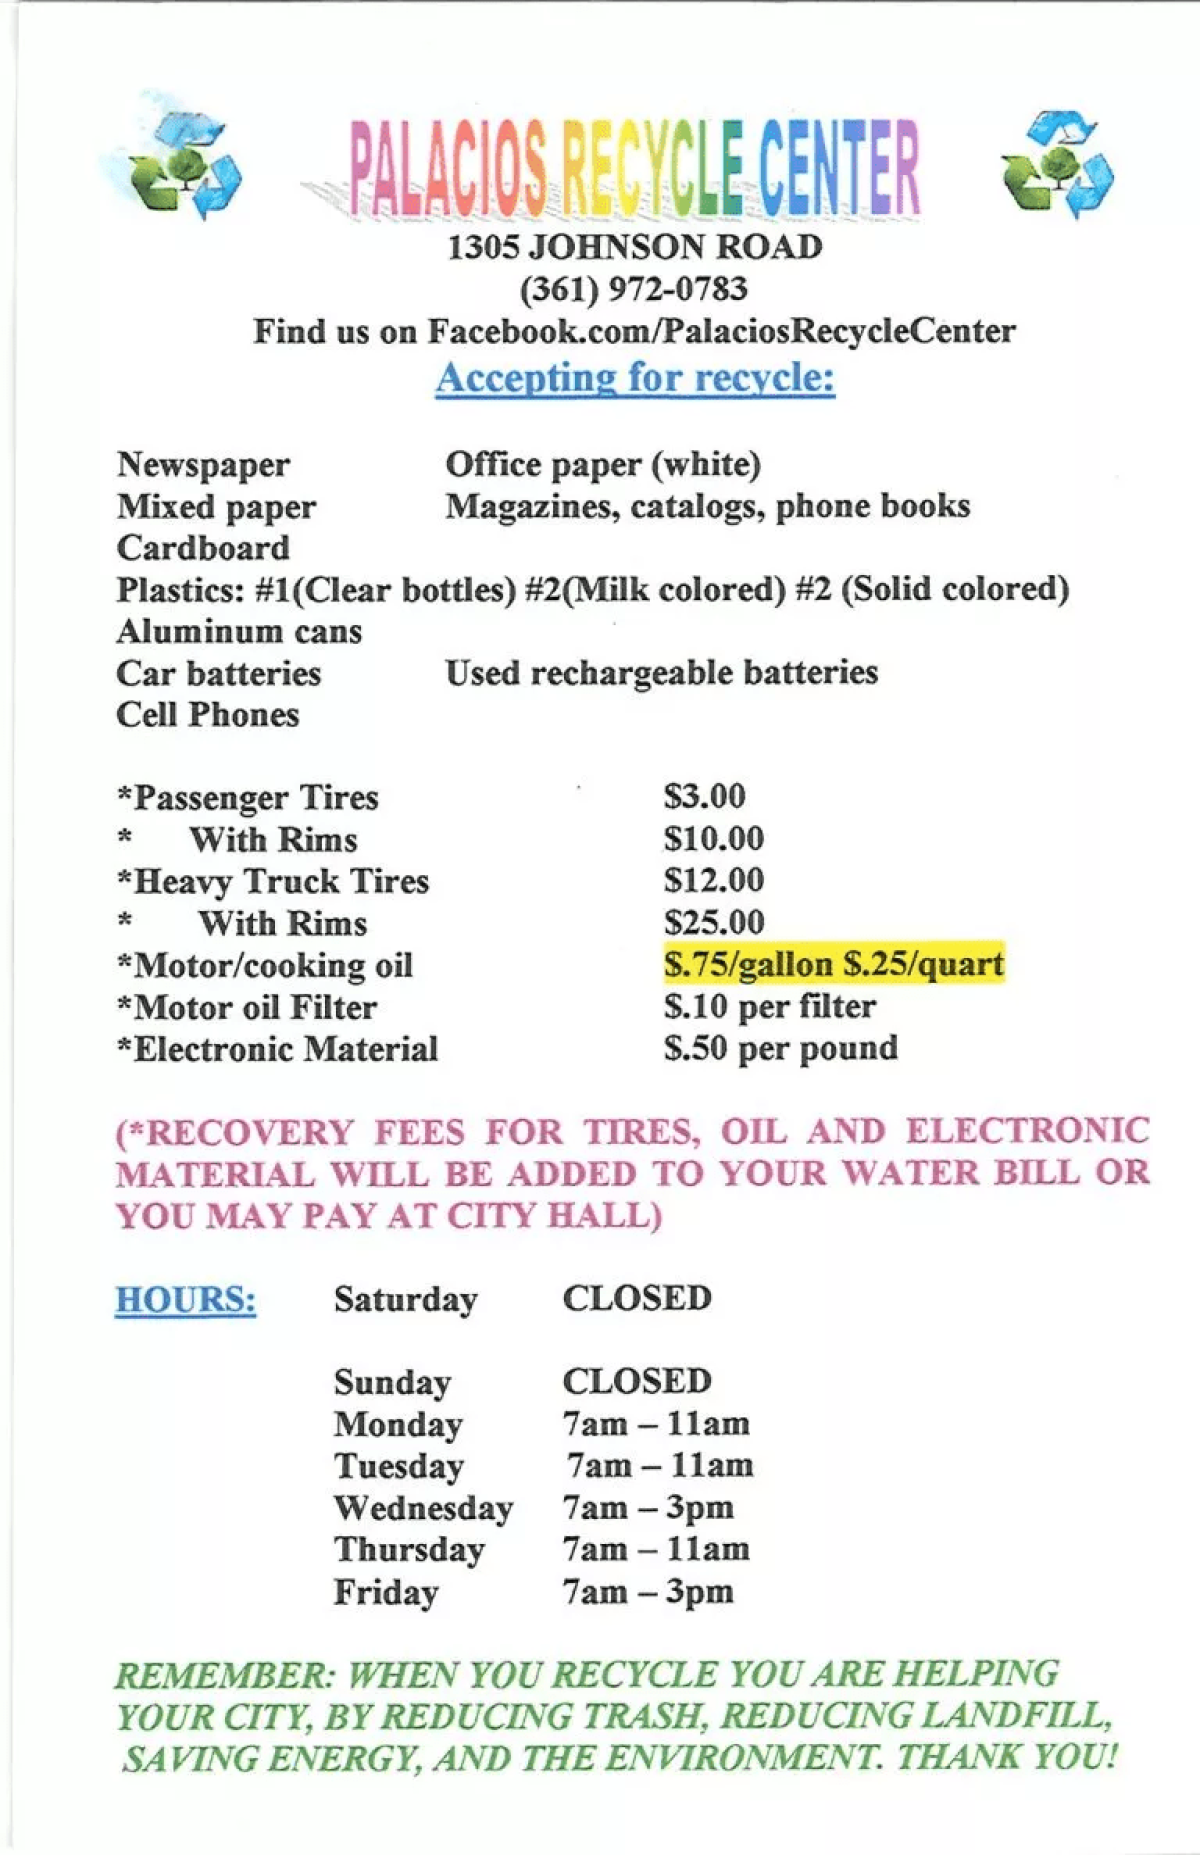 City of Palacios Recycle Center Hours